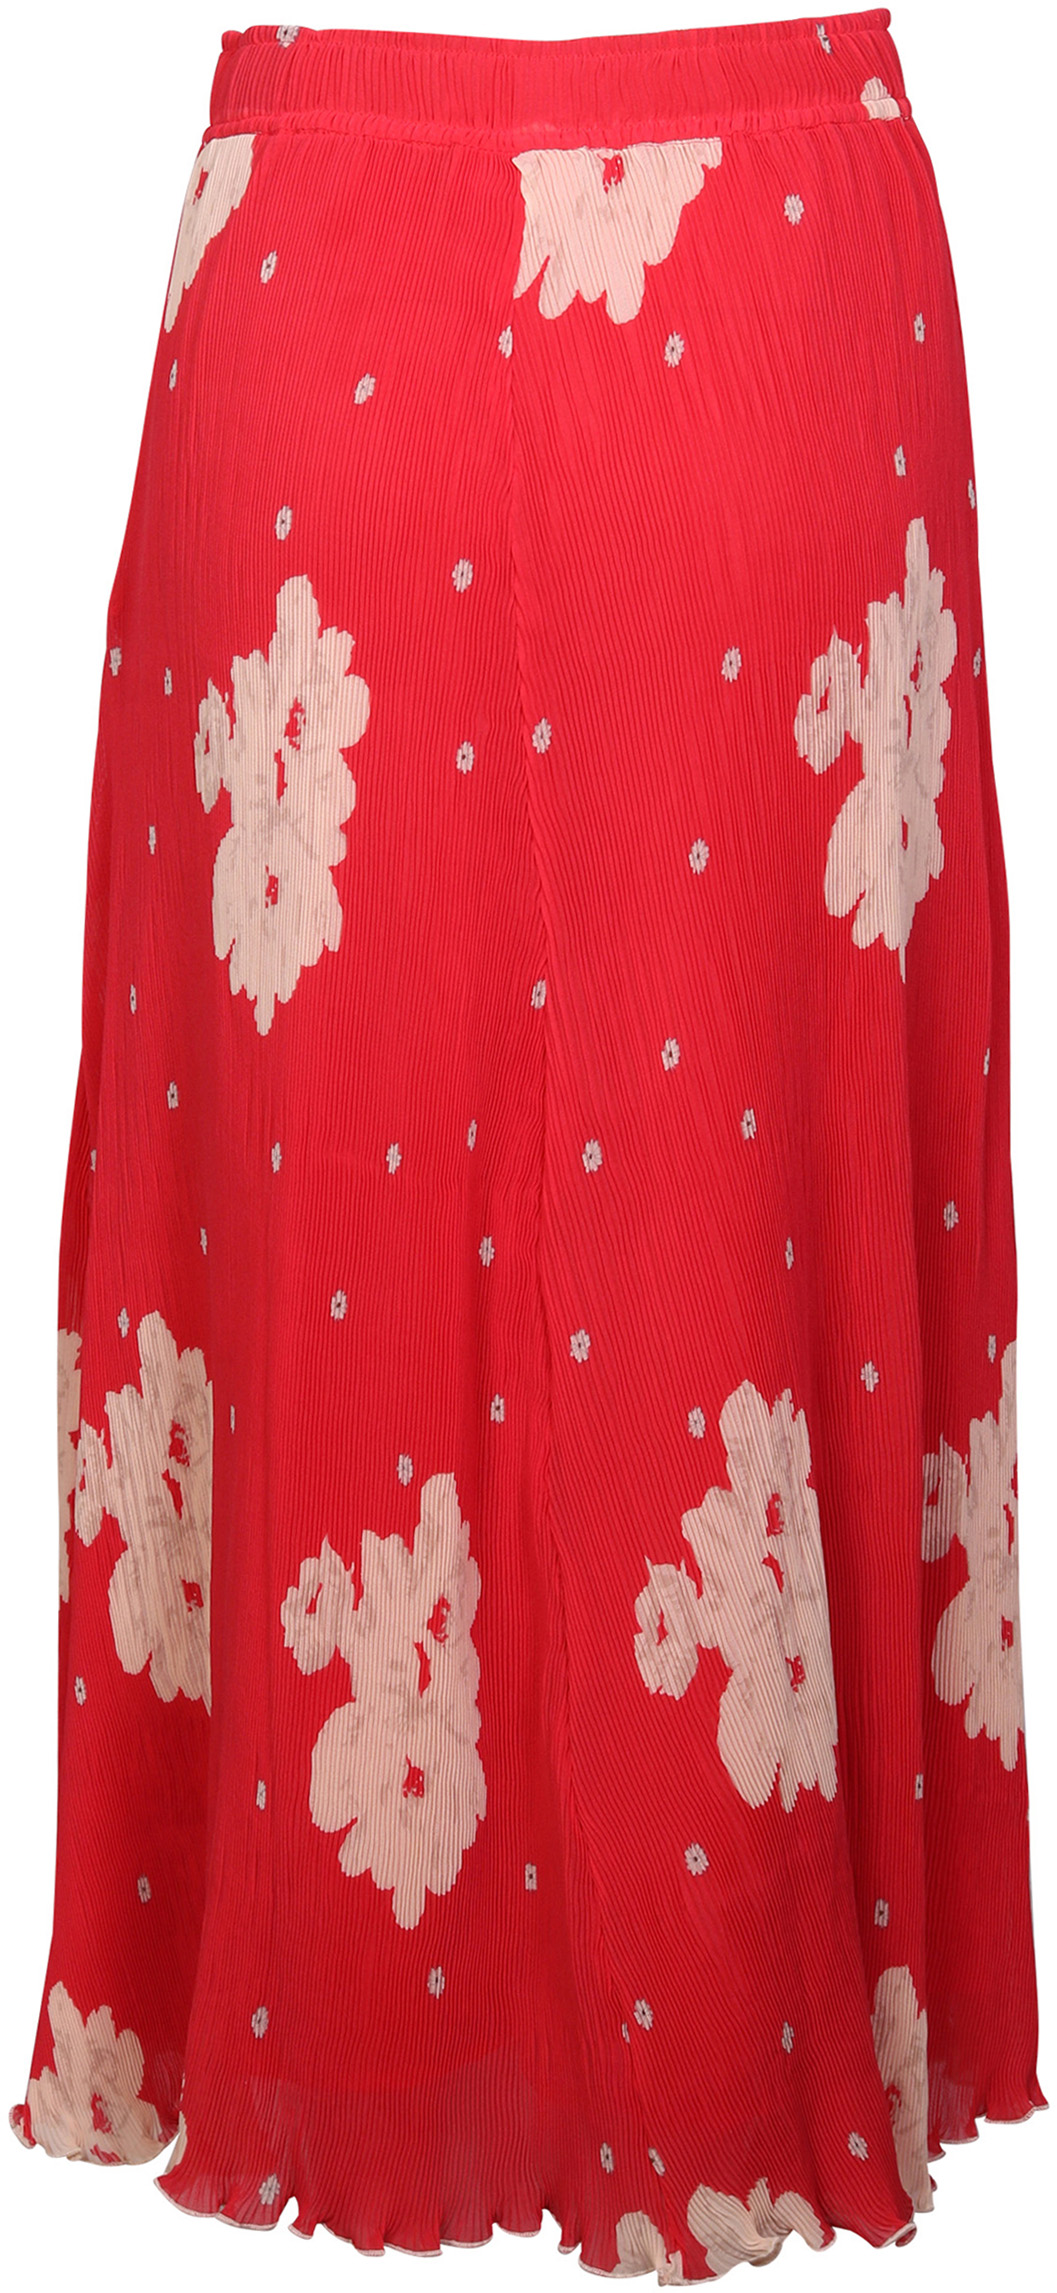 Ganni Pleated Recycled Polyester Skirt Red Printed